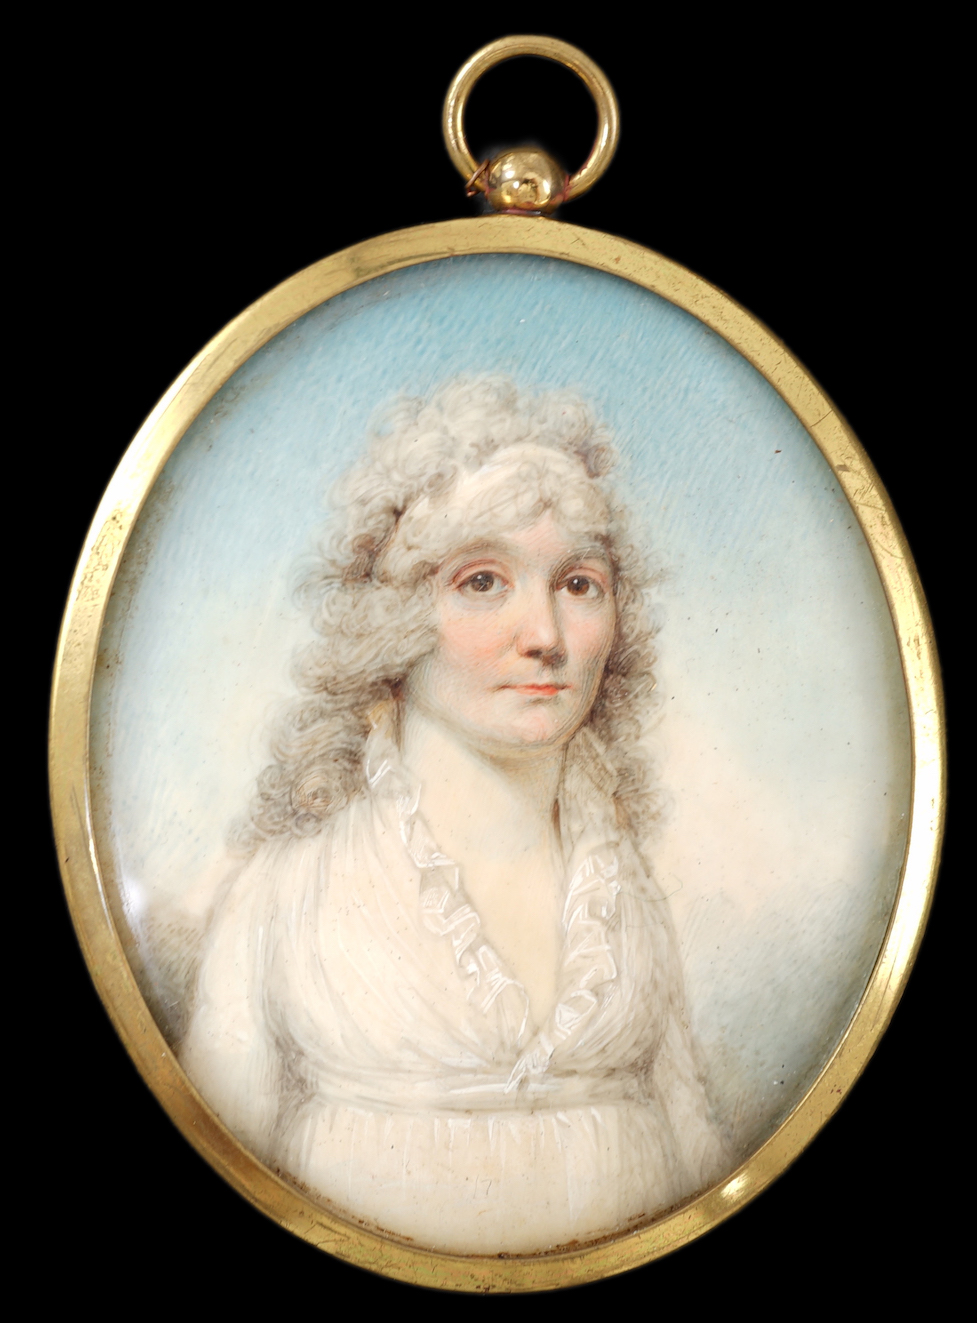 English School circa 1790-1800, Portrait miniature of a lady wearing a white dress, clouds beyond, watercolour on ivory, 7 x 5.6cm. CITES Submission reference N67WLTQT